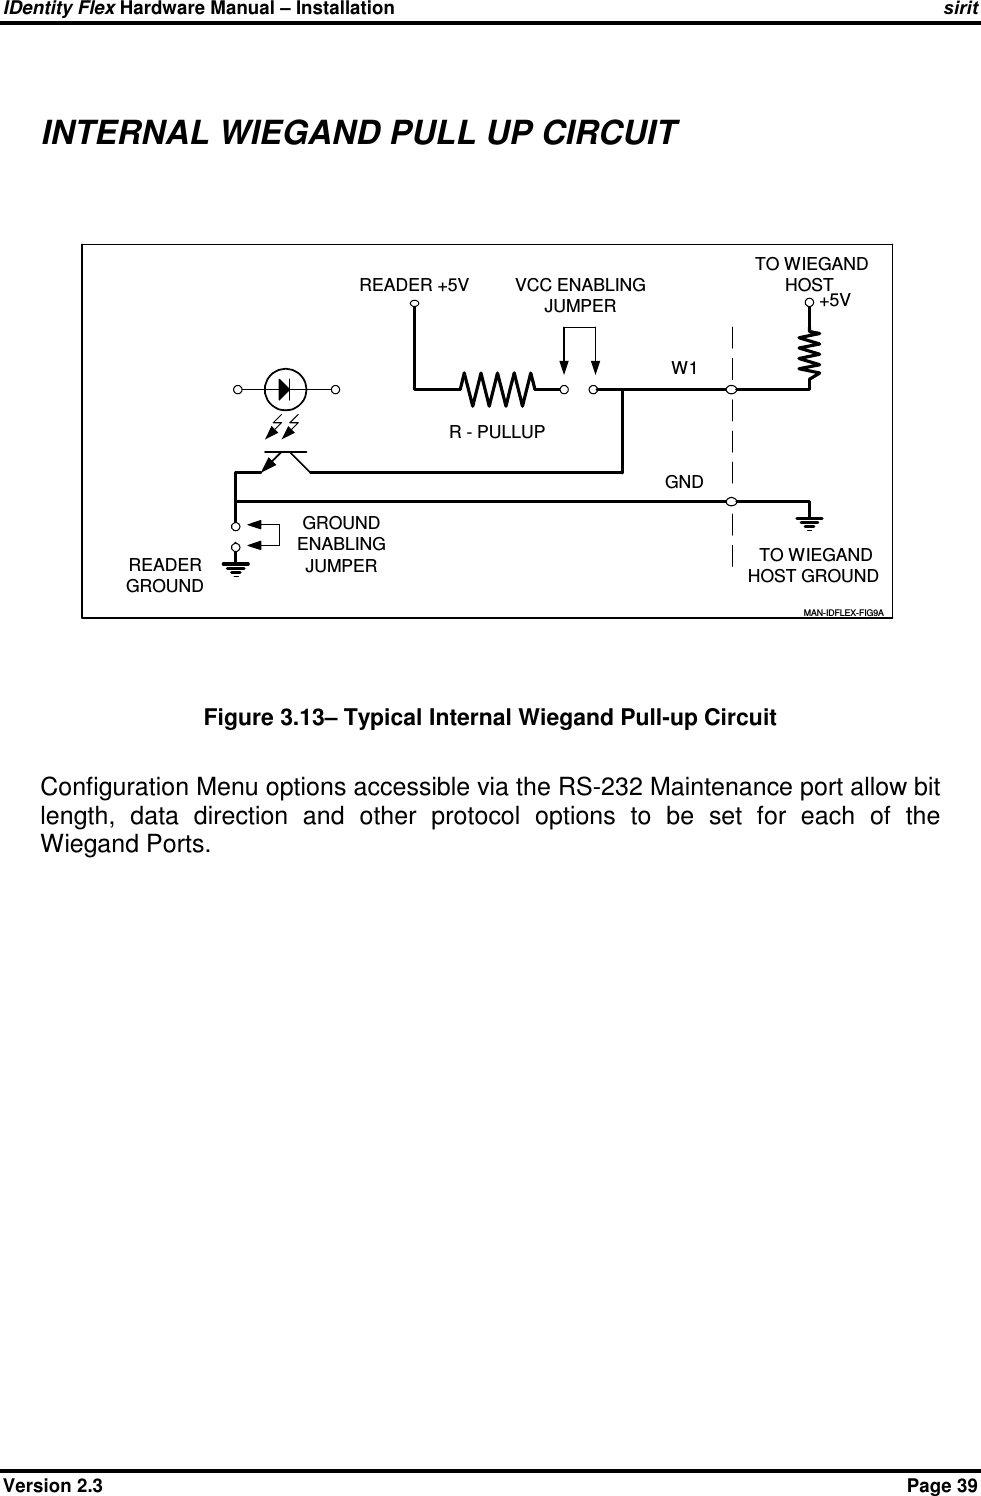 IDentity Flex Hardware Manual – Installation   sirit Version 2.3    Page 39  INTERNAL WIEGAND PULL UP CIRCUIT  GNDREADER +5VMAN-IDFLEX-FIG9AW1R - PULLUPVCC ENABLINGJUMPER +5VGROUNDENABLINGJUMPER TO WIEGANDHOST TO WIEGANDHOST GROUNDREADERGROUND Figure 3.13– Typical Internal Wiegand Pull-up Circuit  Configuration Menu options accessible via the RS-232 Maintenance port allow bit length,  data  direction  and  other  protocol  options  to  be  set  for  each  of  the Wiegand Ports.   